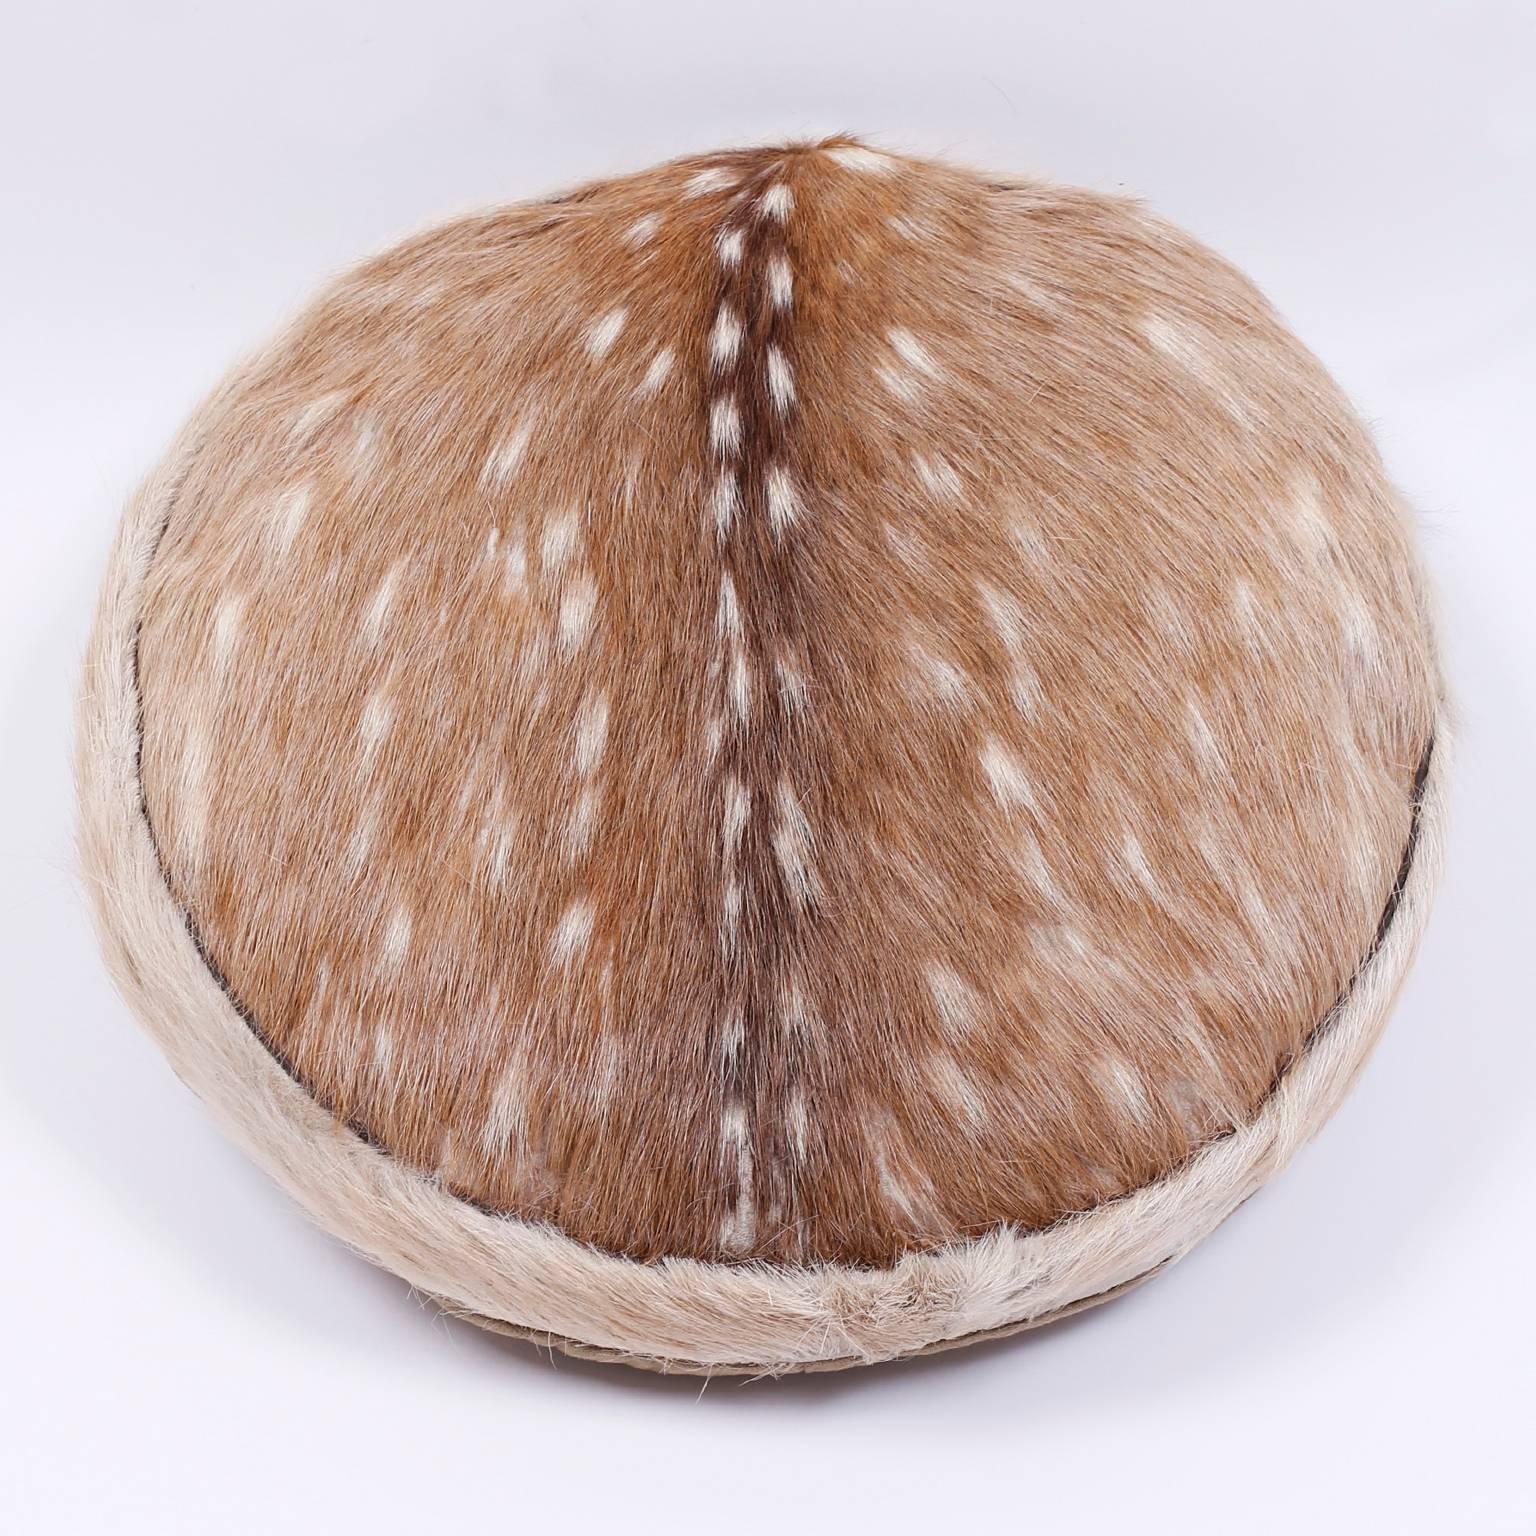 Round handmade pillow crafted from the distinctive spotted chital or axis deer with a two button cotton back.